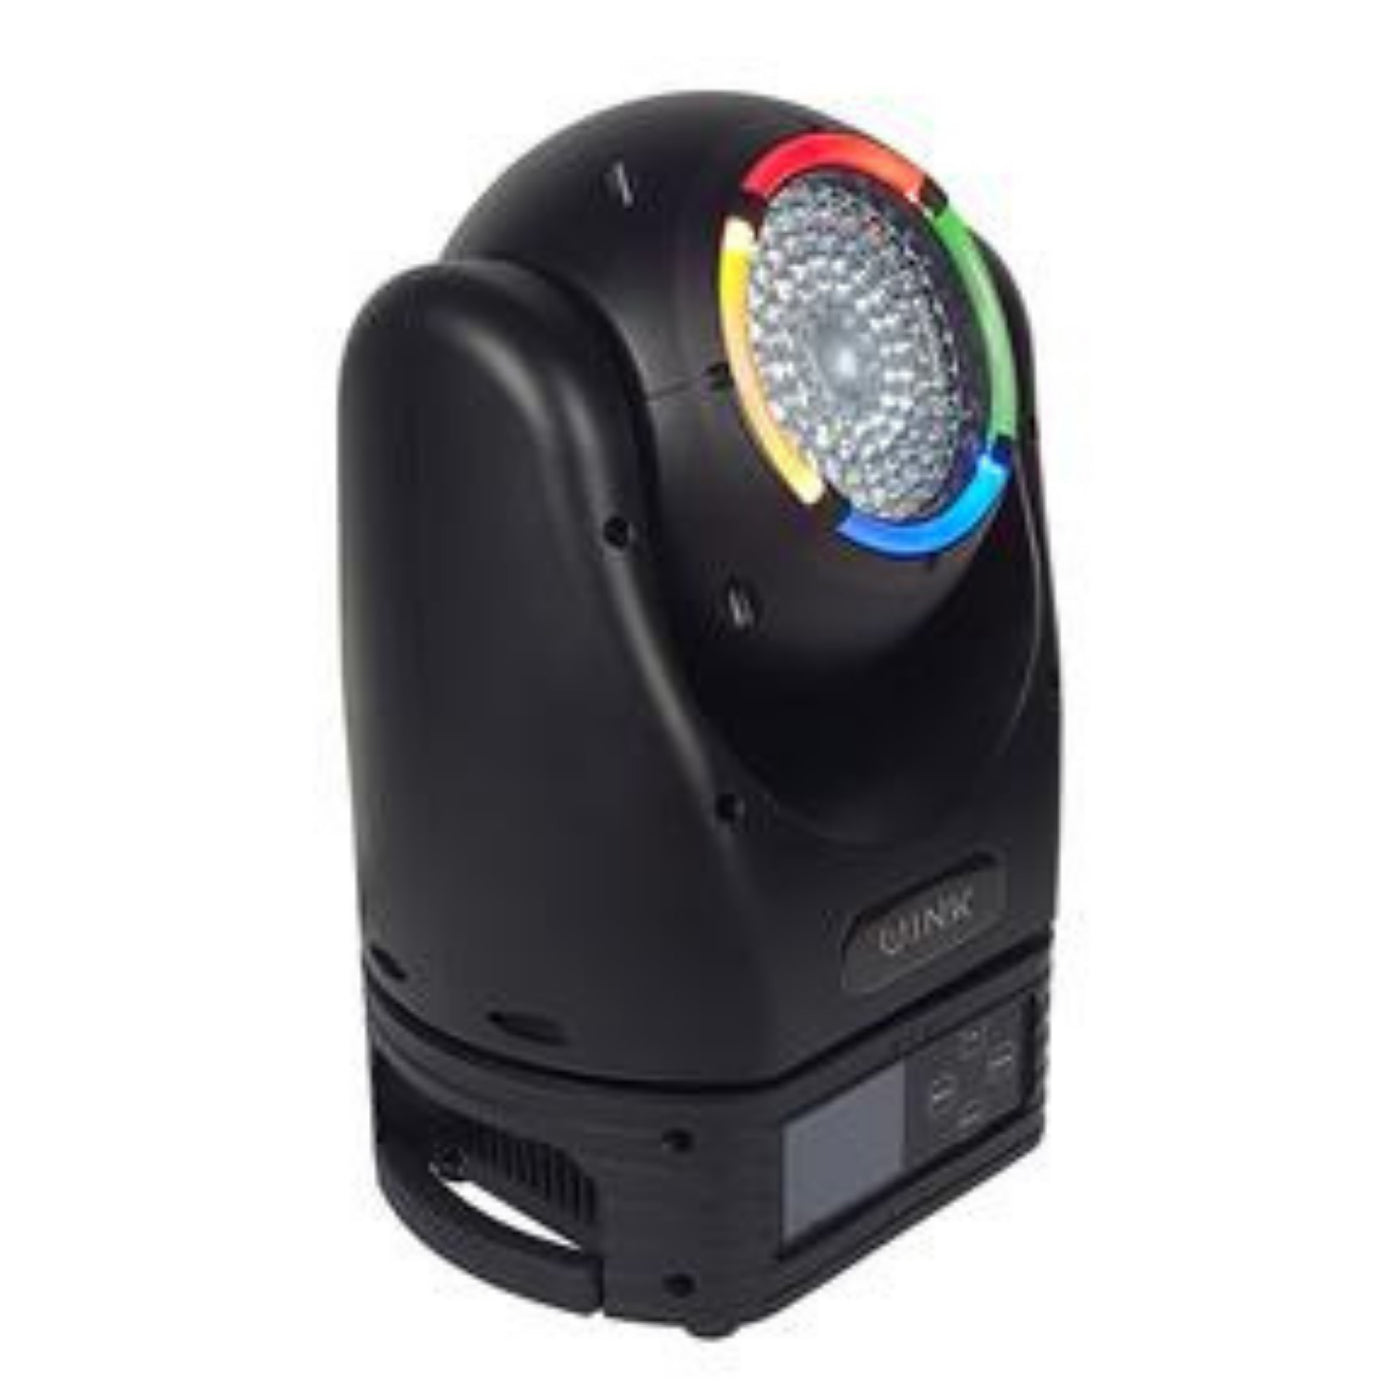 Blizzard 123893 WINK LED Moving Head Fixture, NUDGE-NUDGE, WINK-WINK!